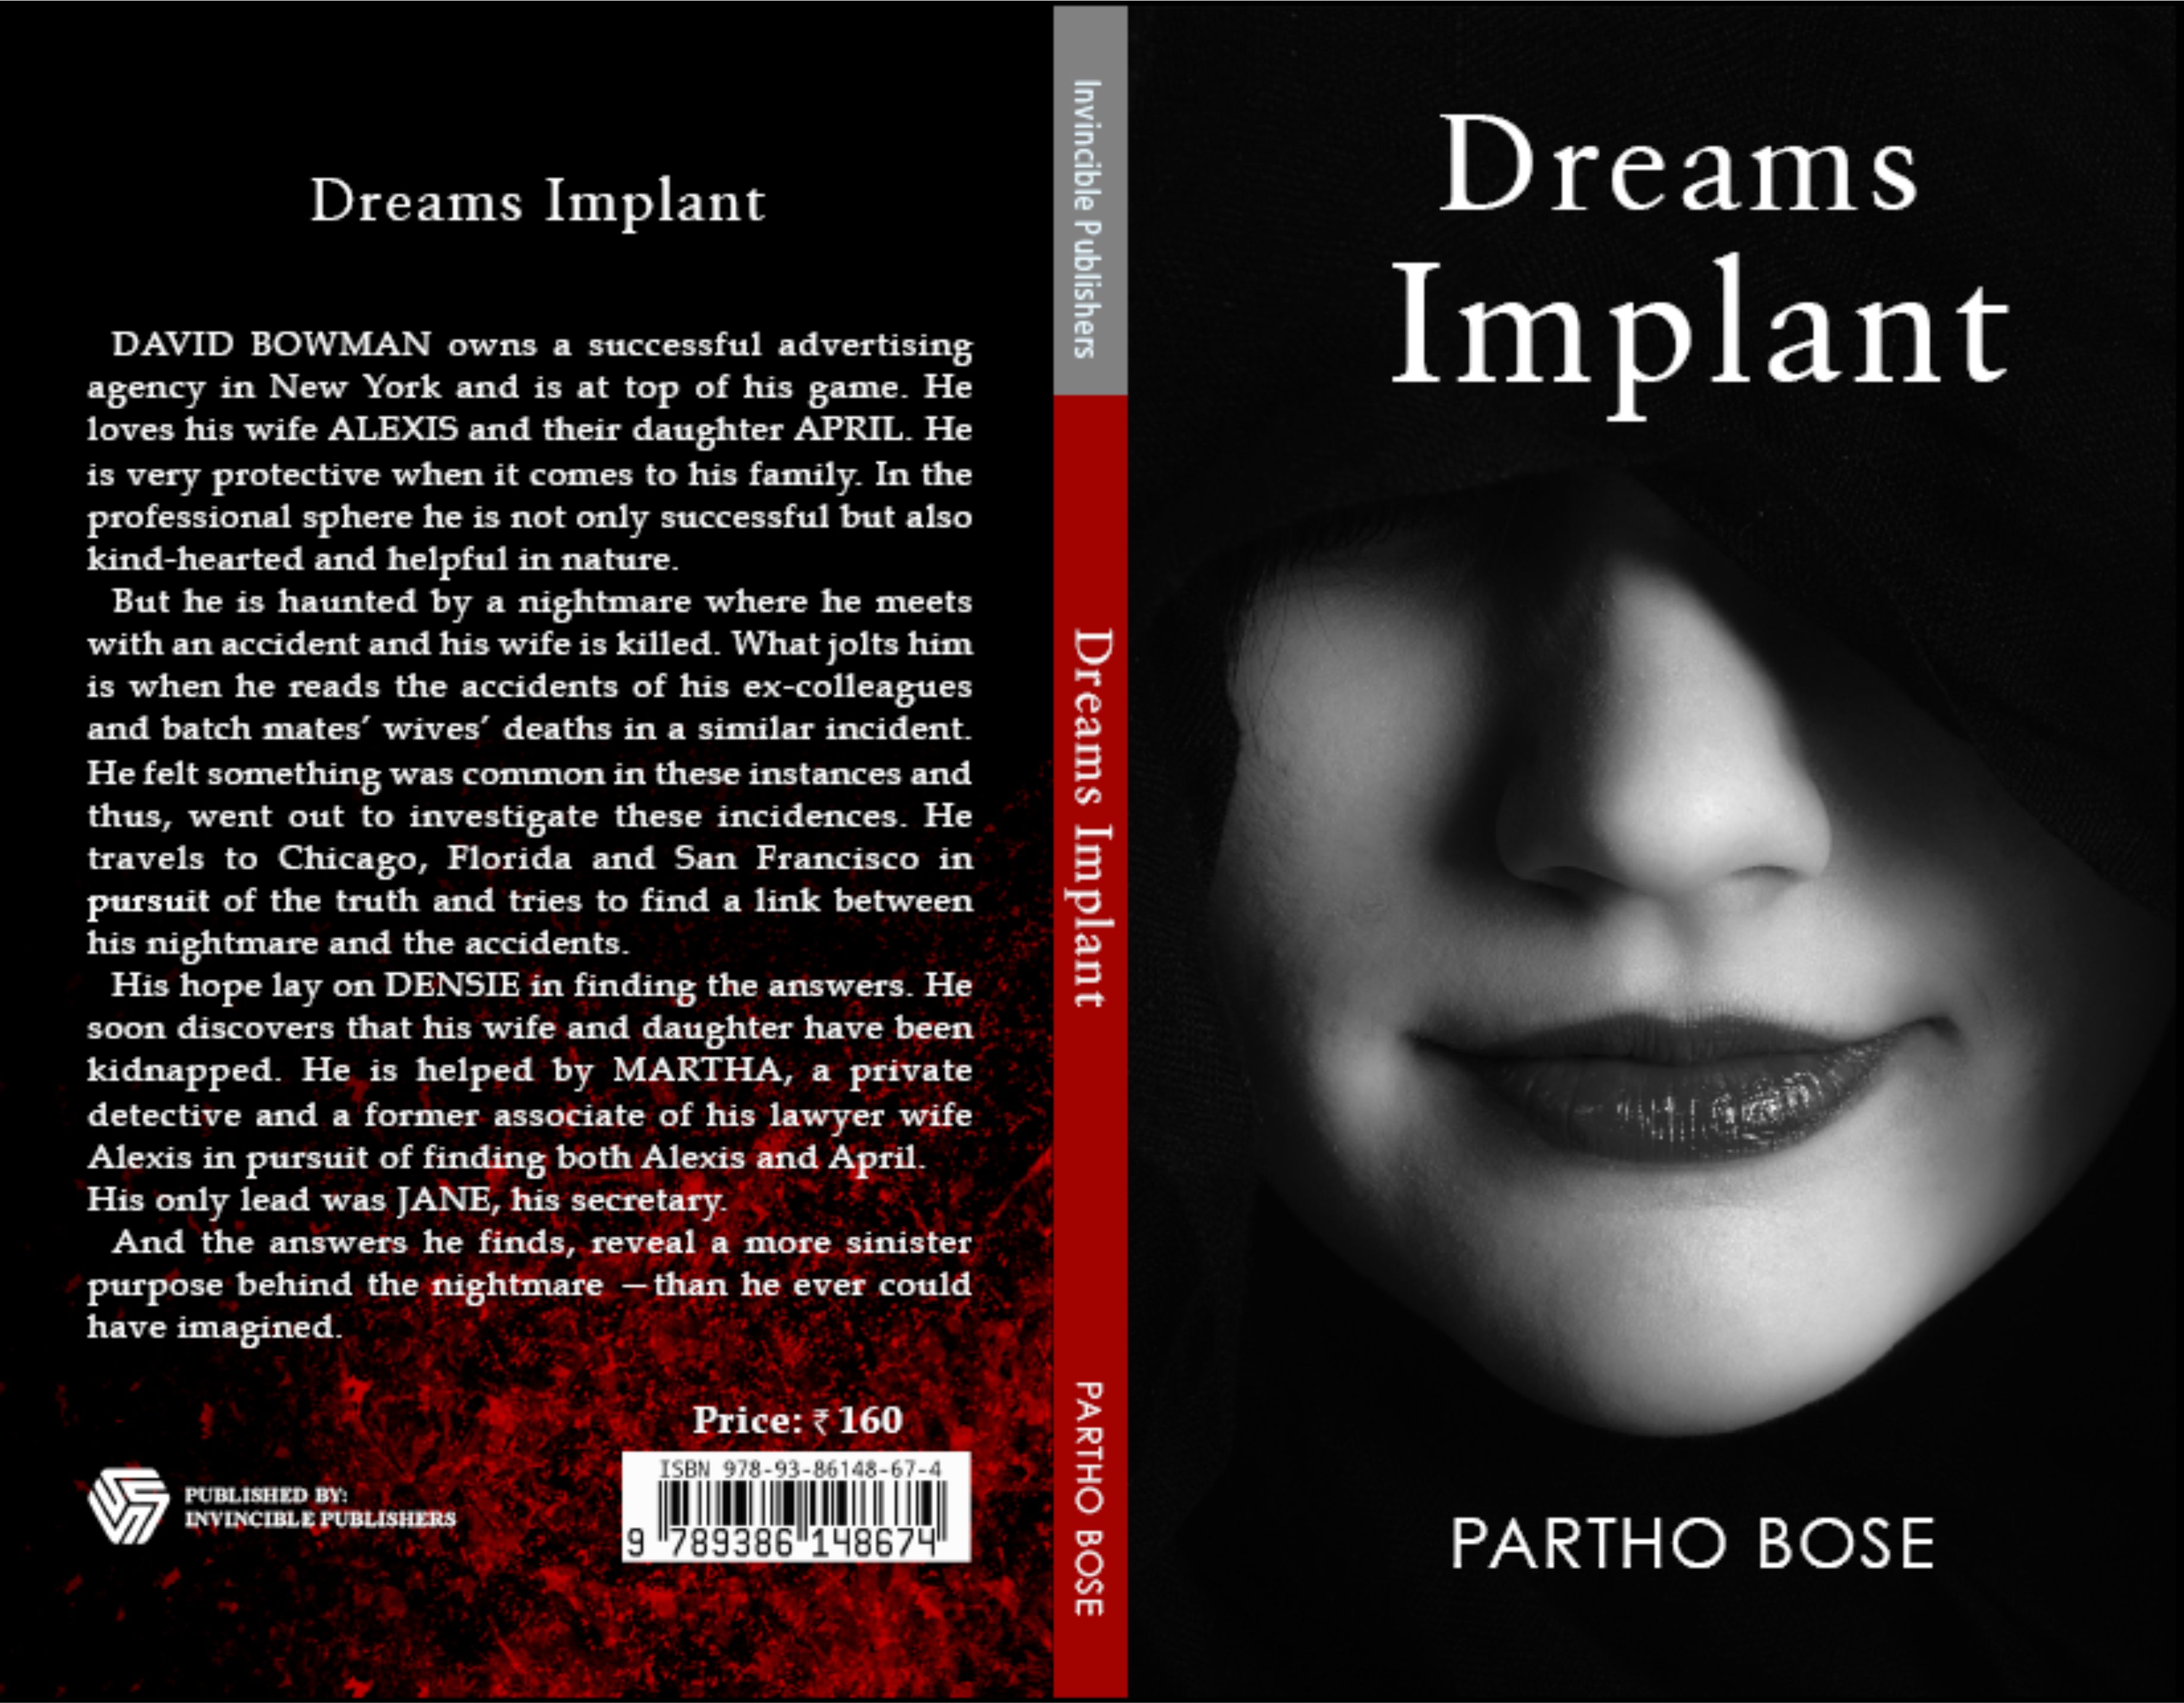 FREE: Dreams Implant by Partho Bose